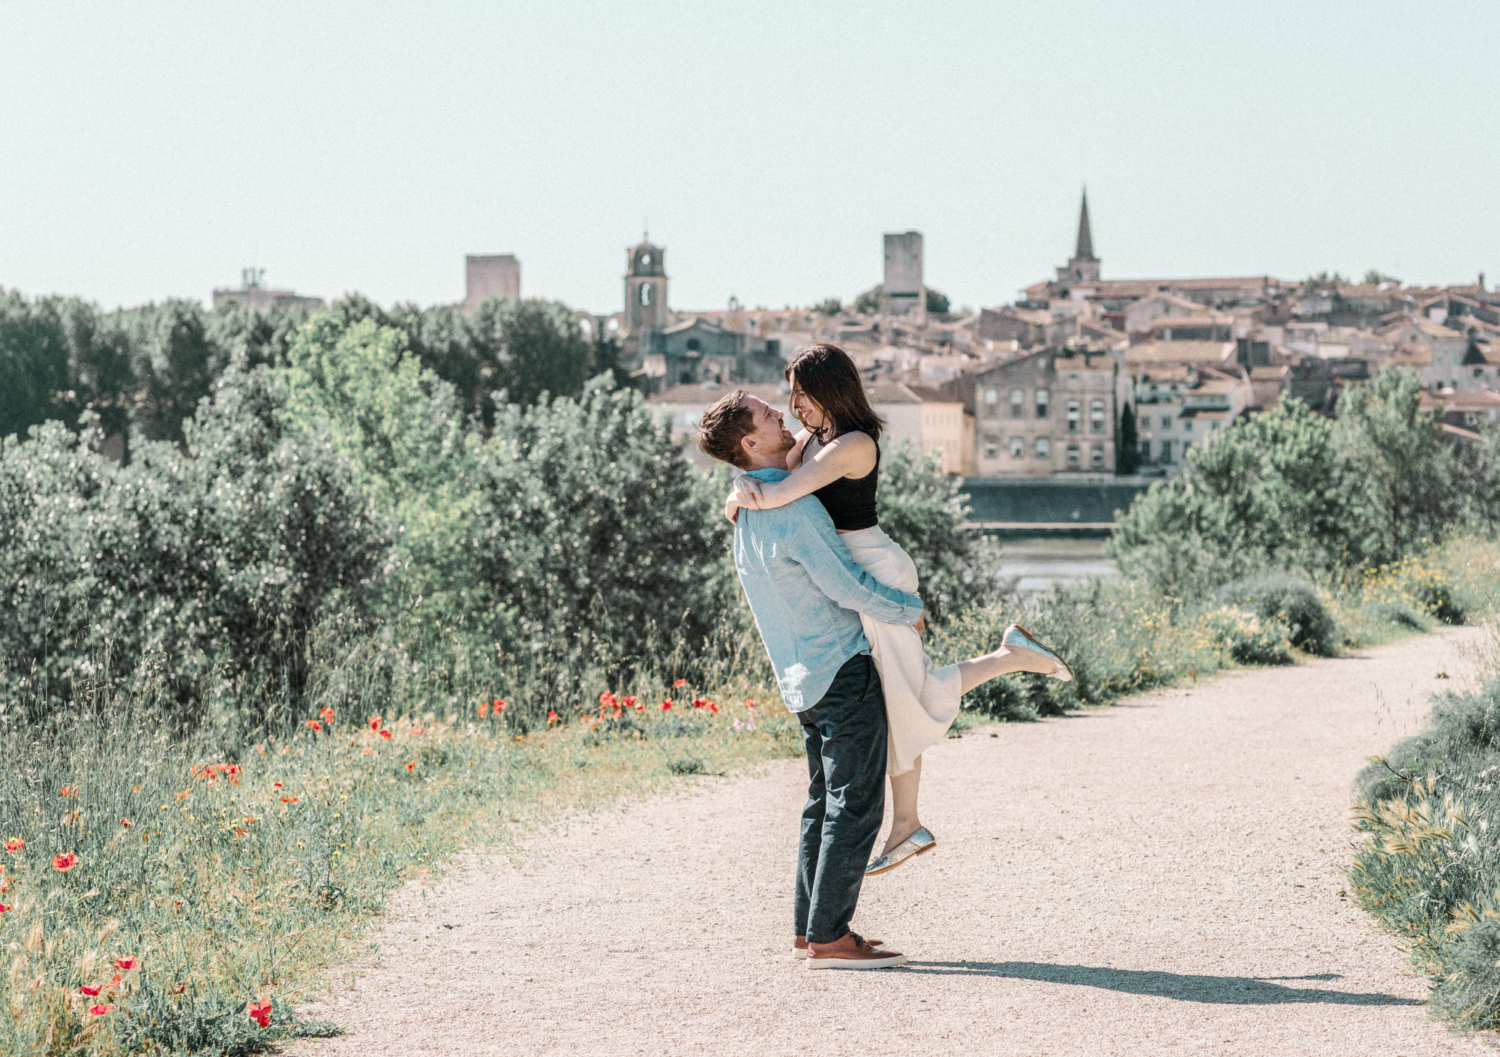 man lifts woman in air with arles in background